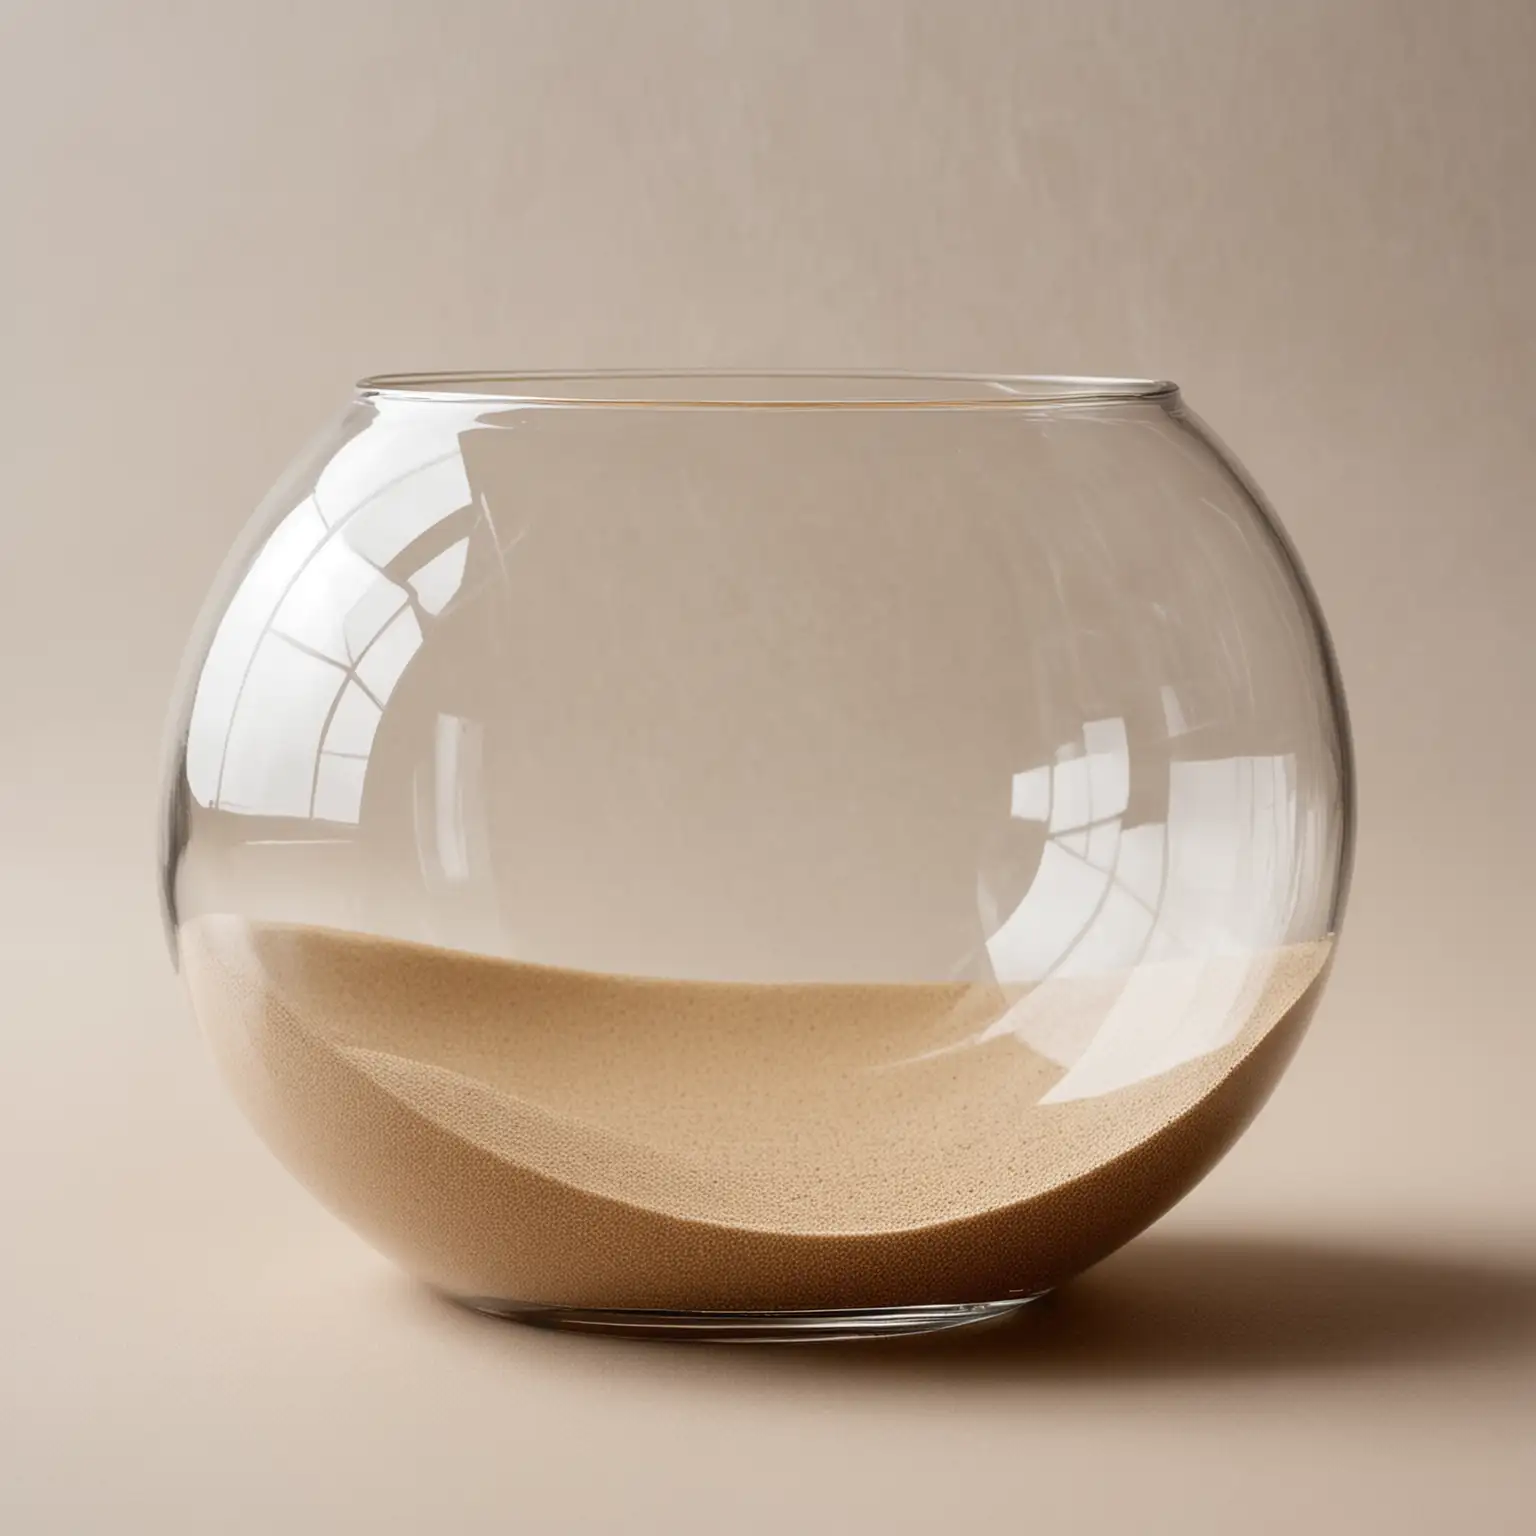 a clear glass round vase that is shallow and wide, made of nice quality, it is simply an image of a clear glass shallow round vase filled part way up with natural colored fine sand